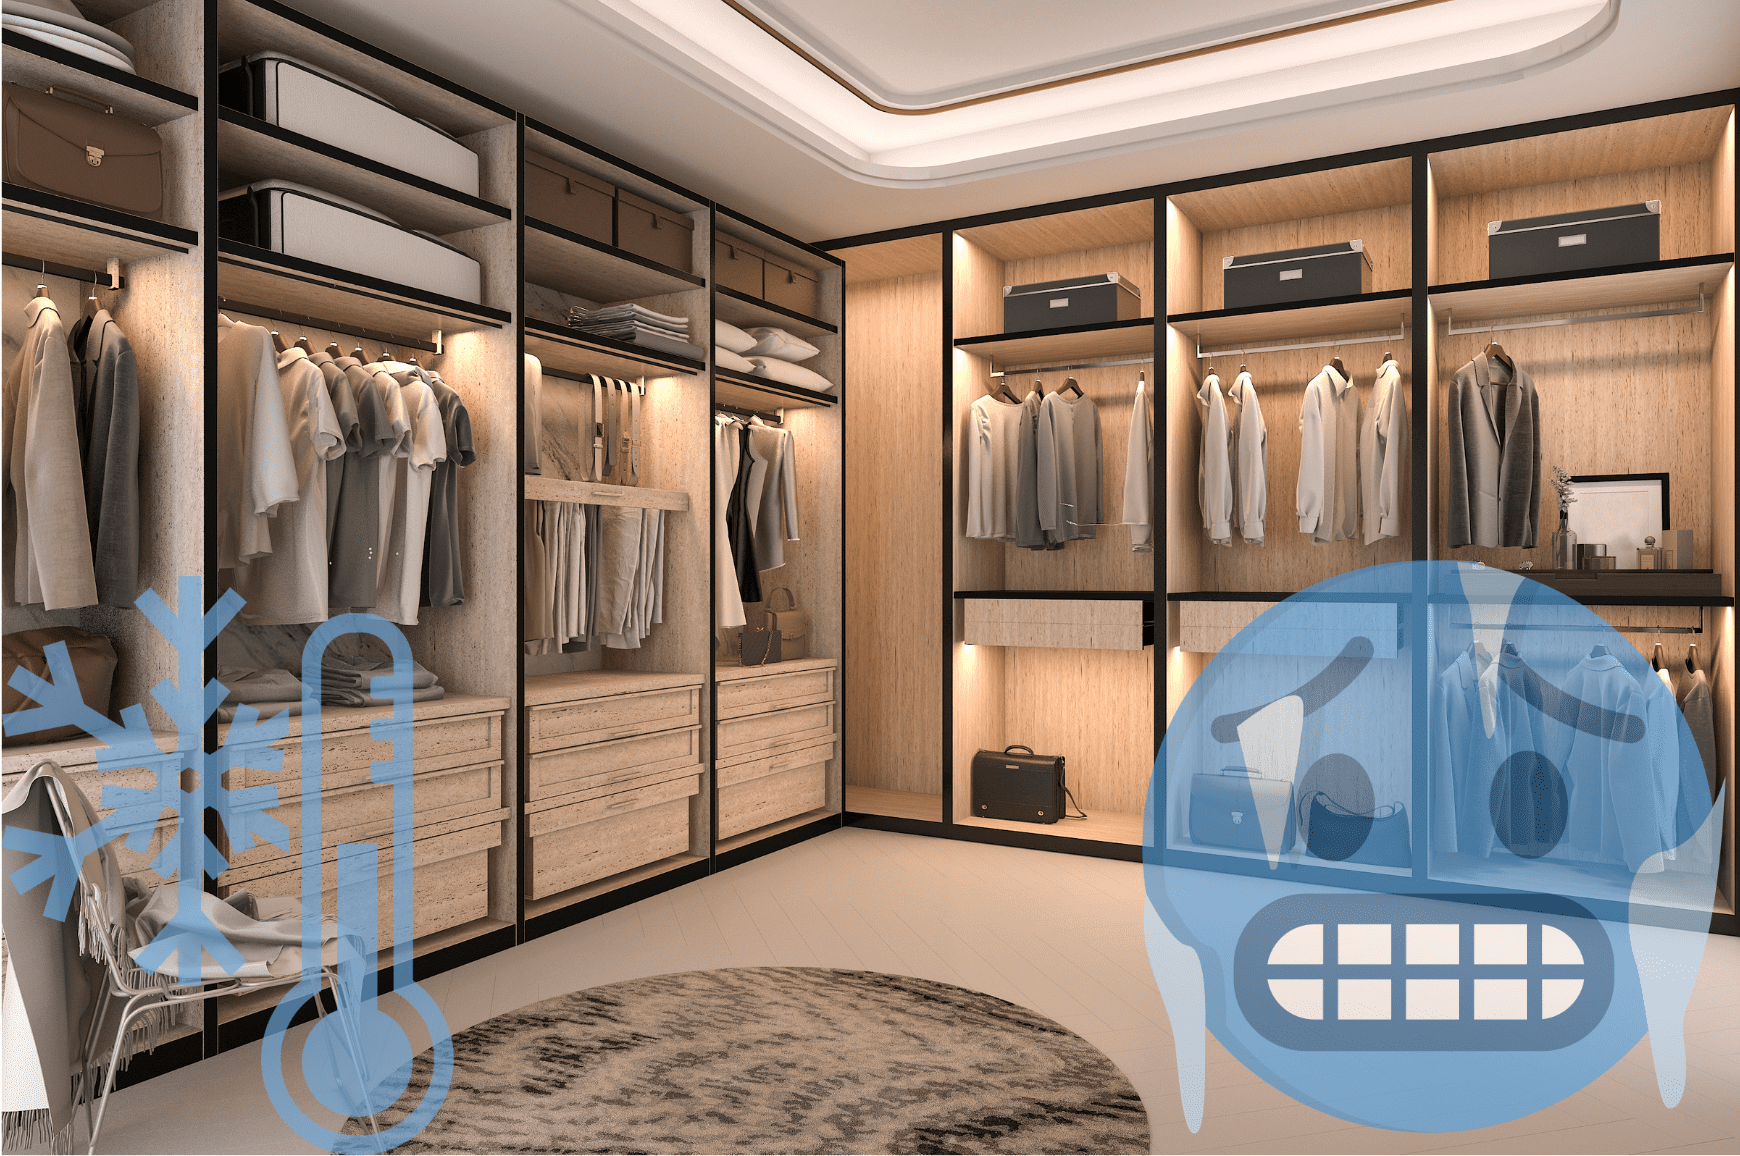 What can you do about a cold closet?